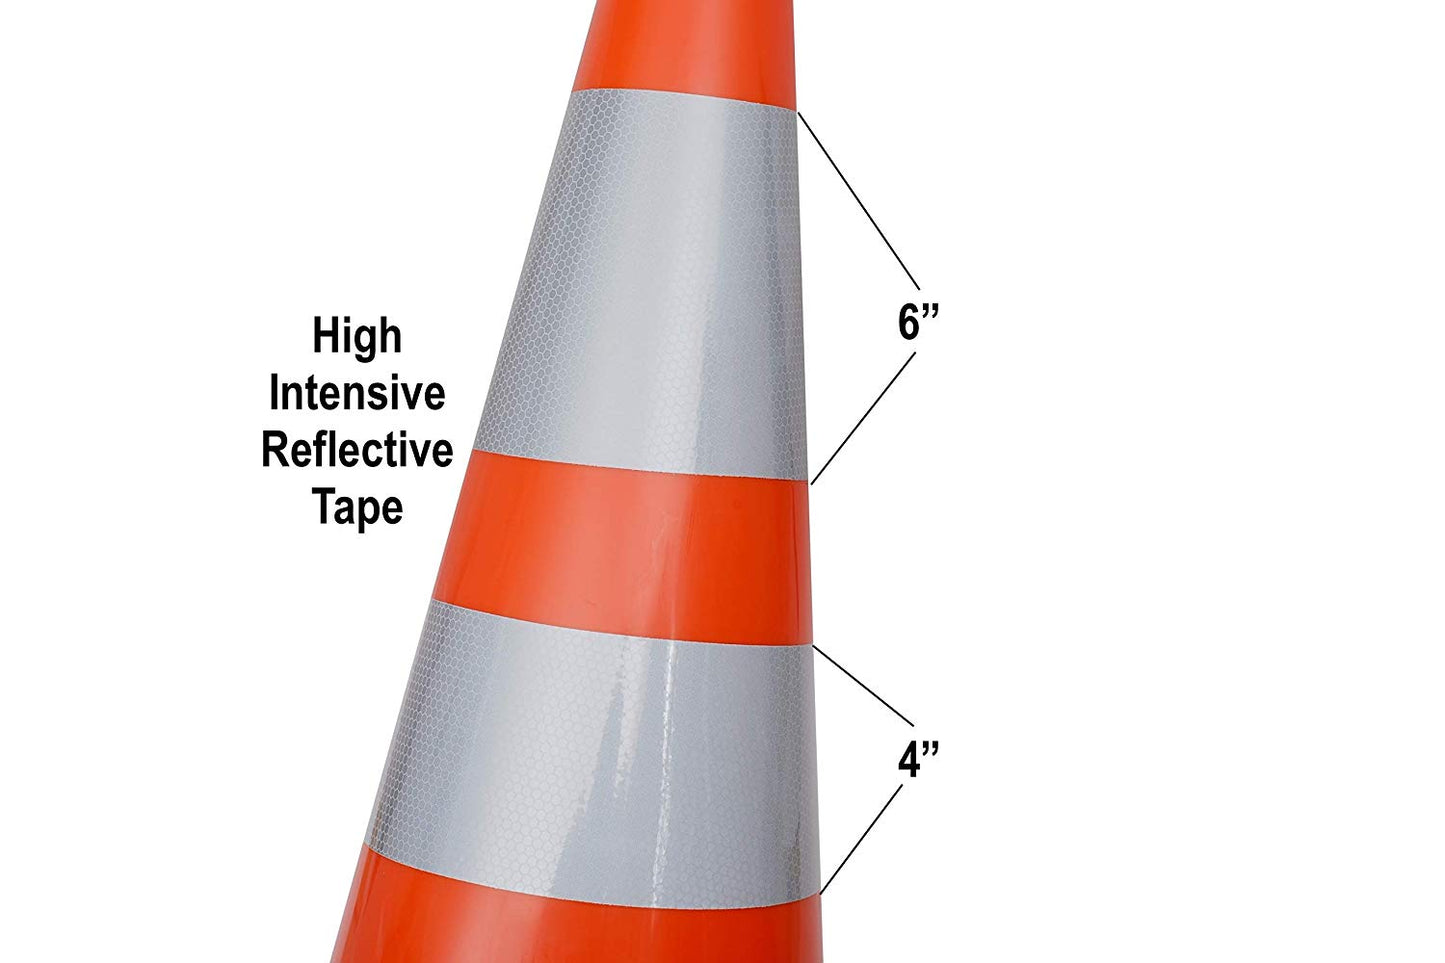 28" Height Orange PVC Traffic Safety Cones with Black Base & 6" + 4" Reflective Collars